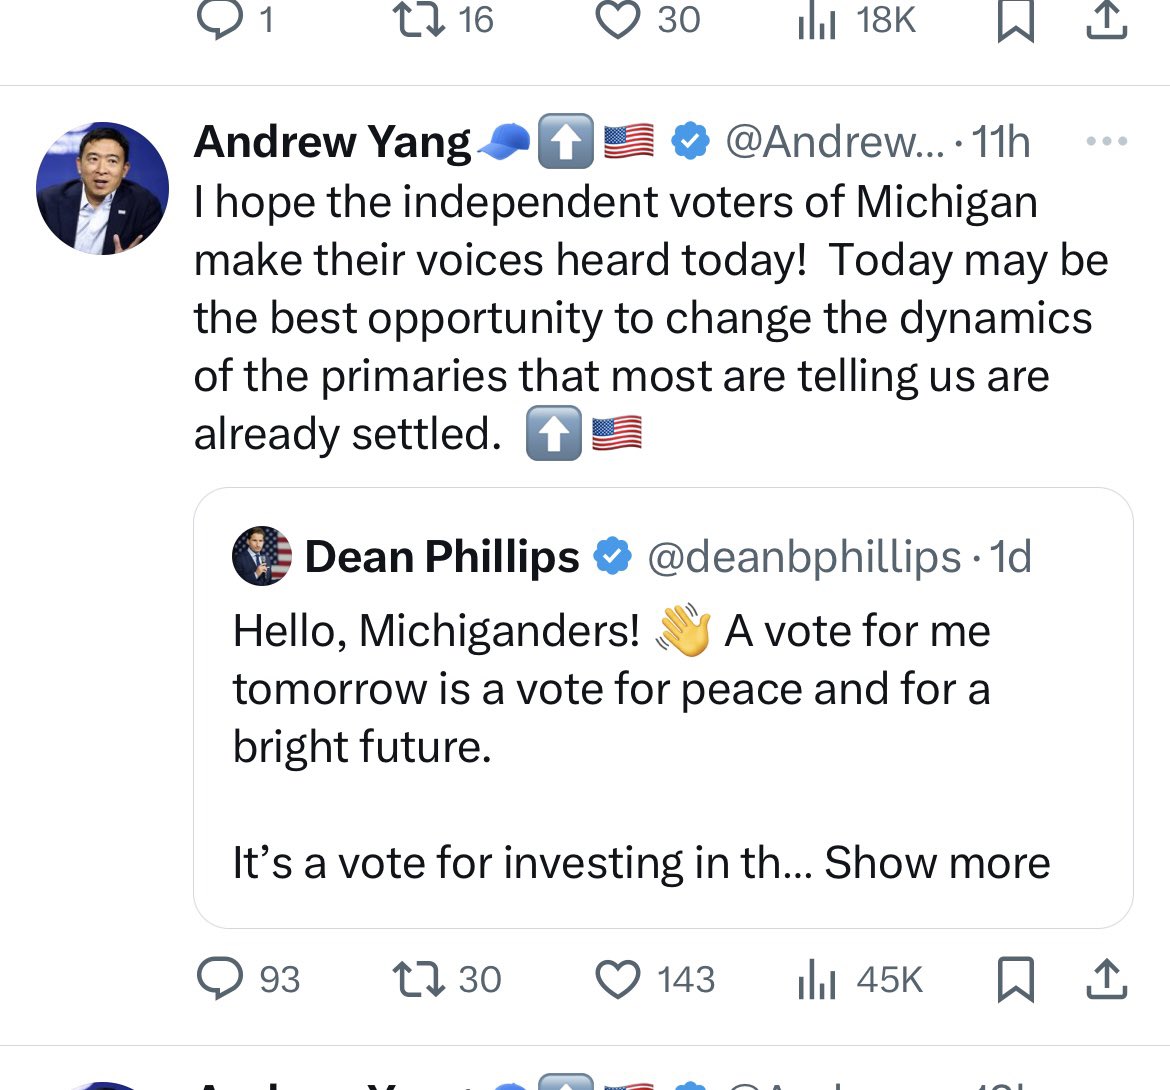 .@AndrewYang is a super smart and thoughtful guy, but definitely one of the bigger losers tonight. I hope he finds his way and commits his time/resources to something more meaningful.